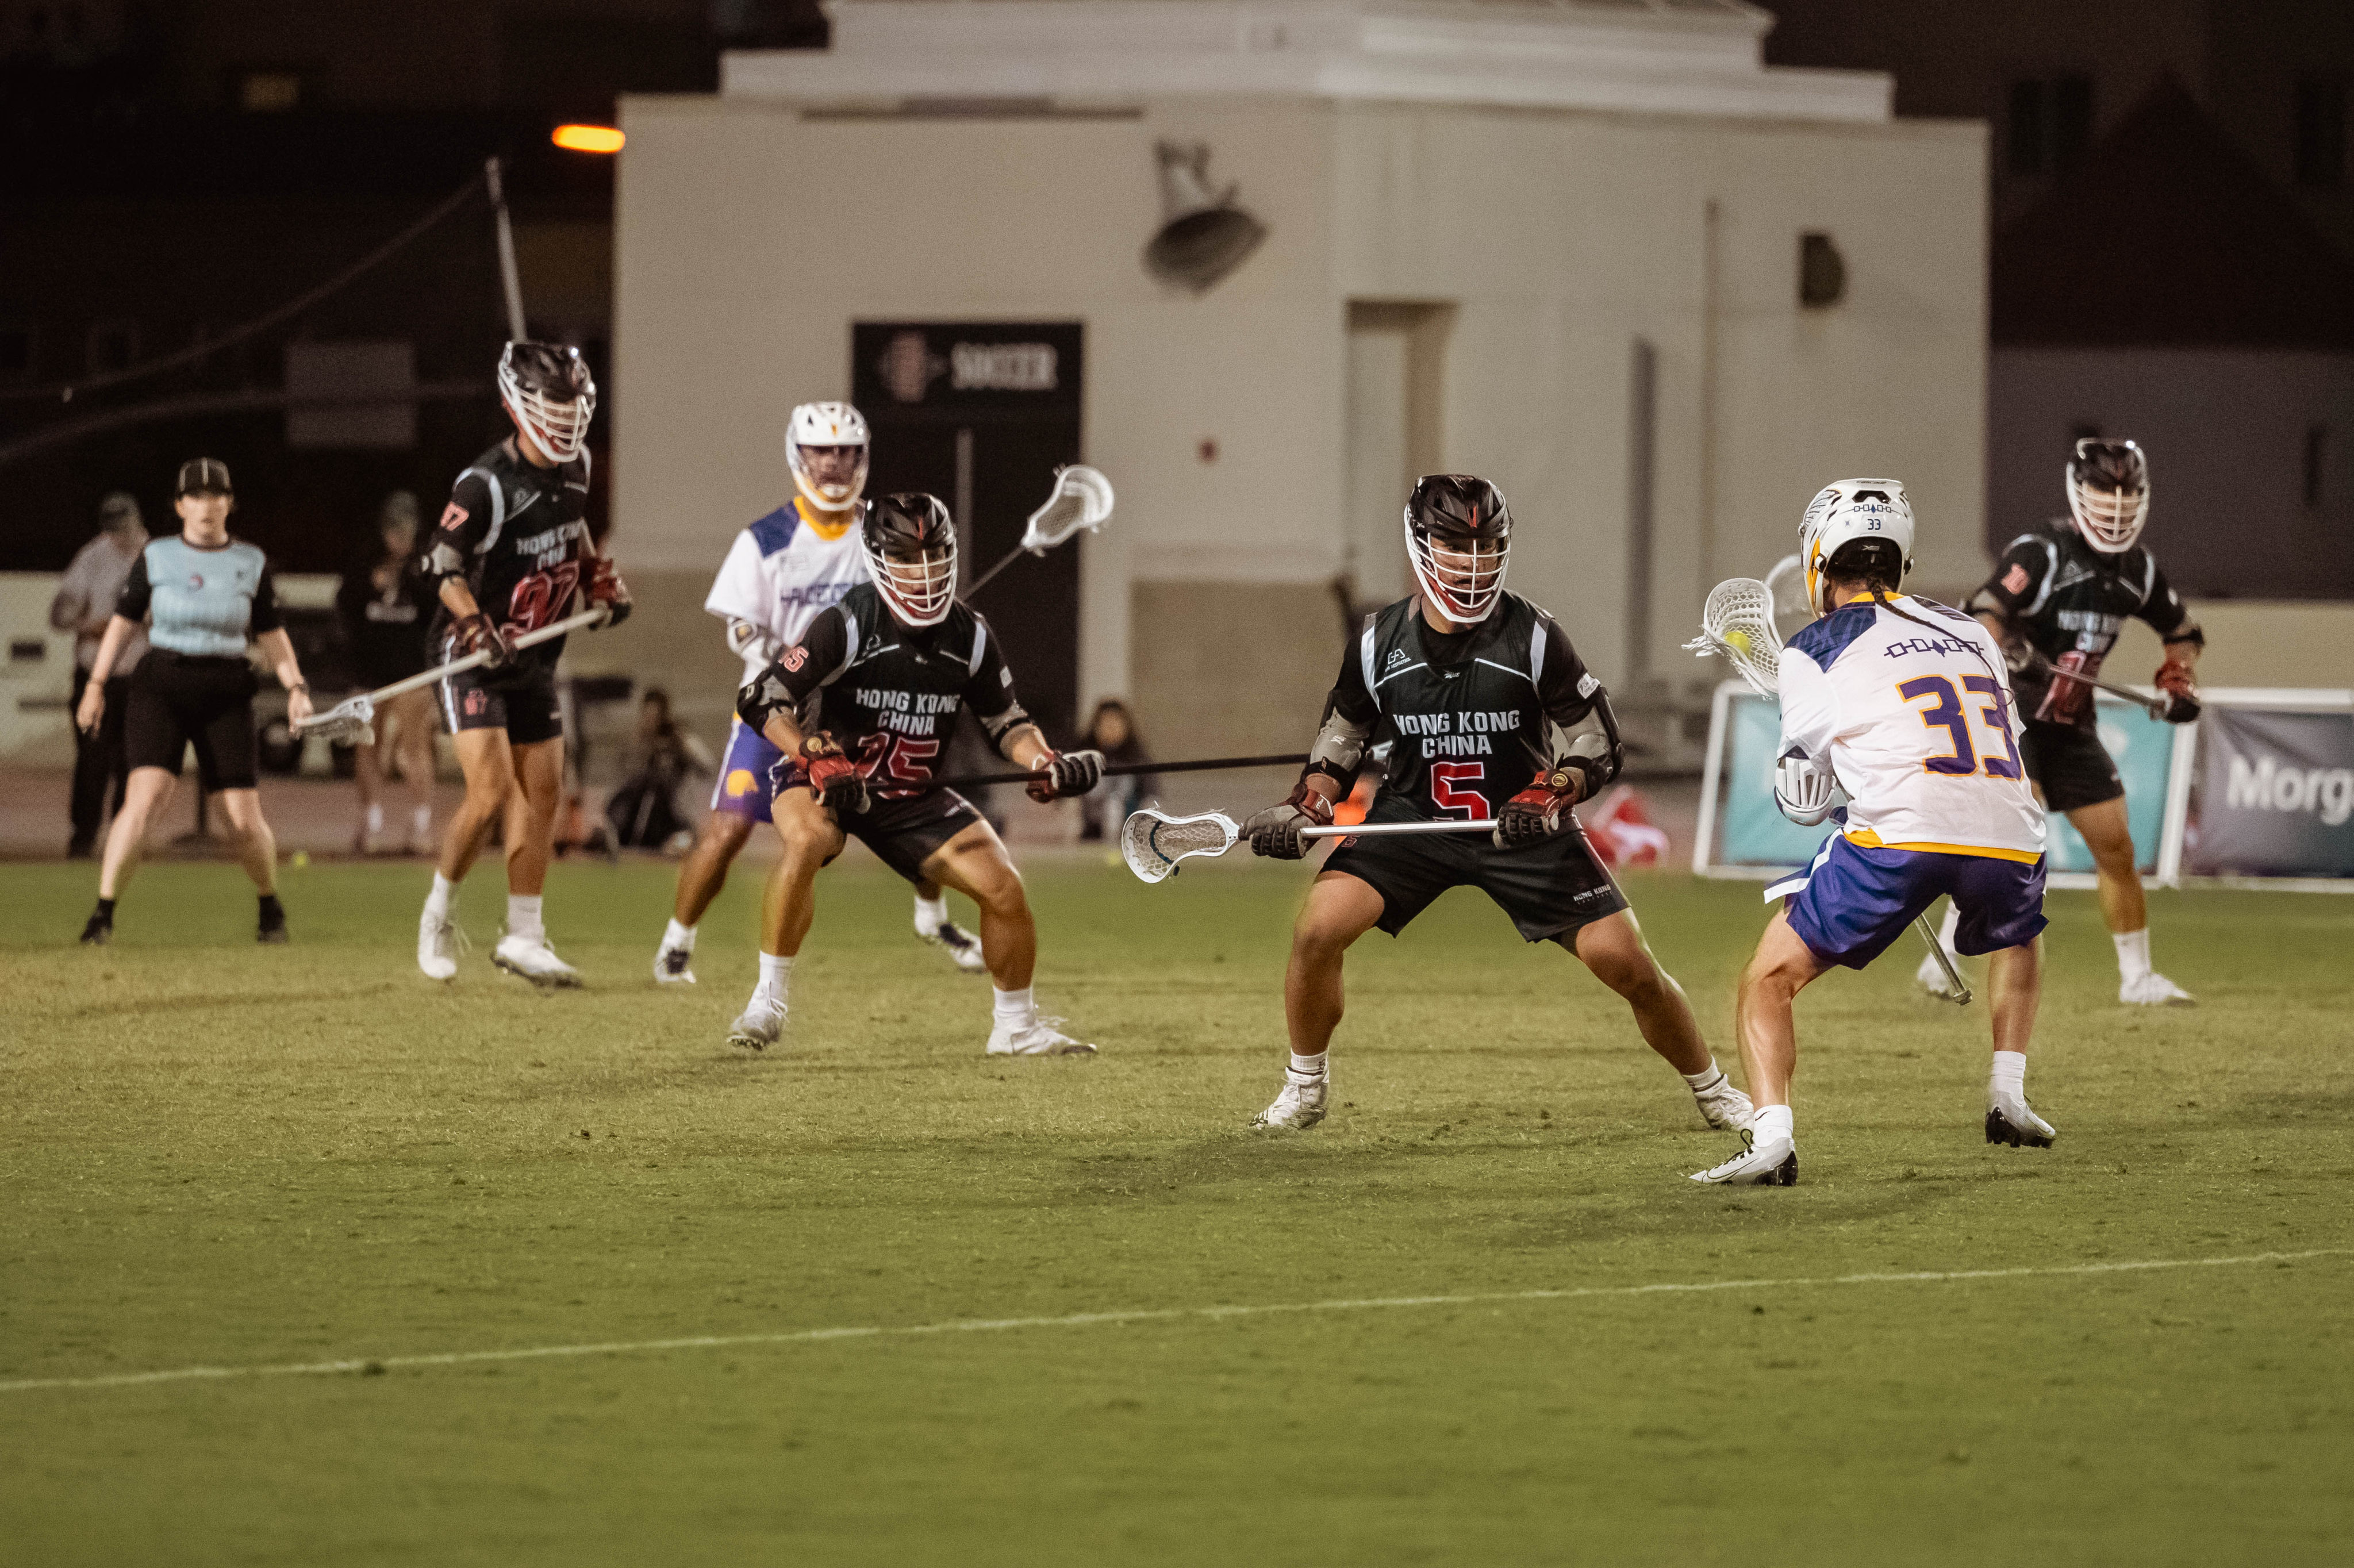 Hong Kong in action against Haudenosaunee in the elite playoffs at the World Lacrosse Championship in San Diego. Photos: Handout